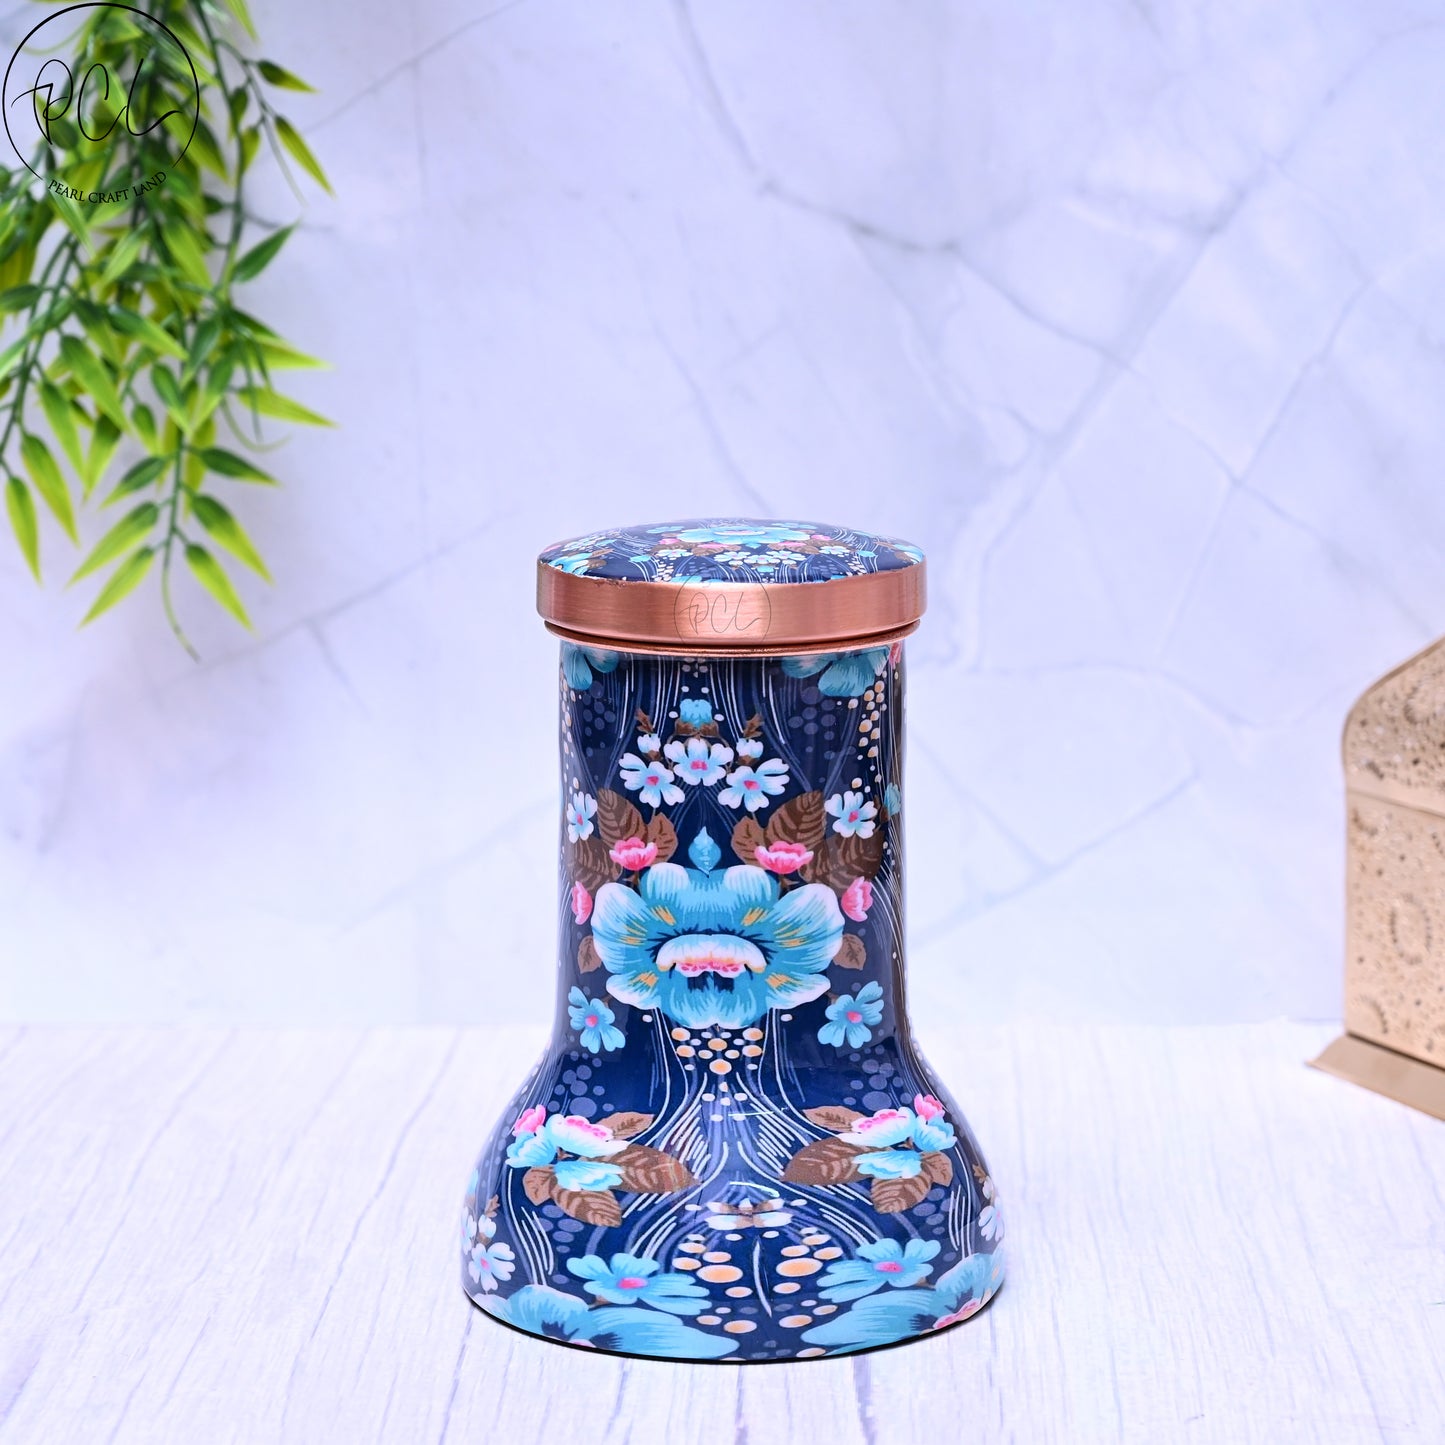 Pure Copper Bedside Blue Floral Printed Jar  with In-Built Glass Capacity 1000ML.